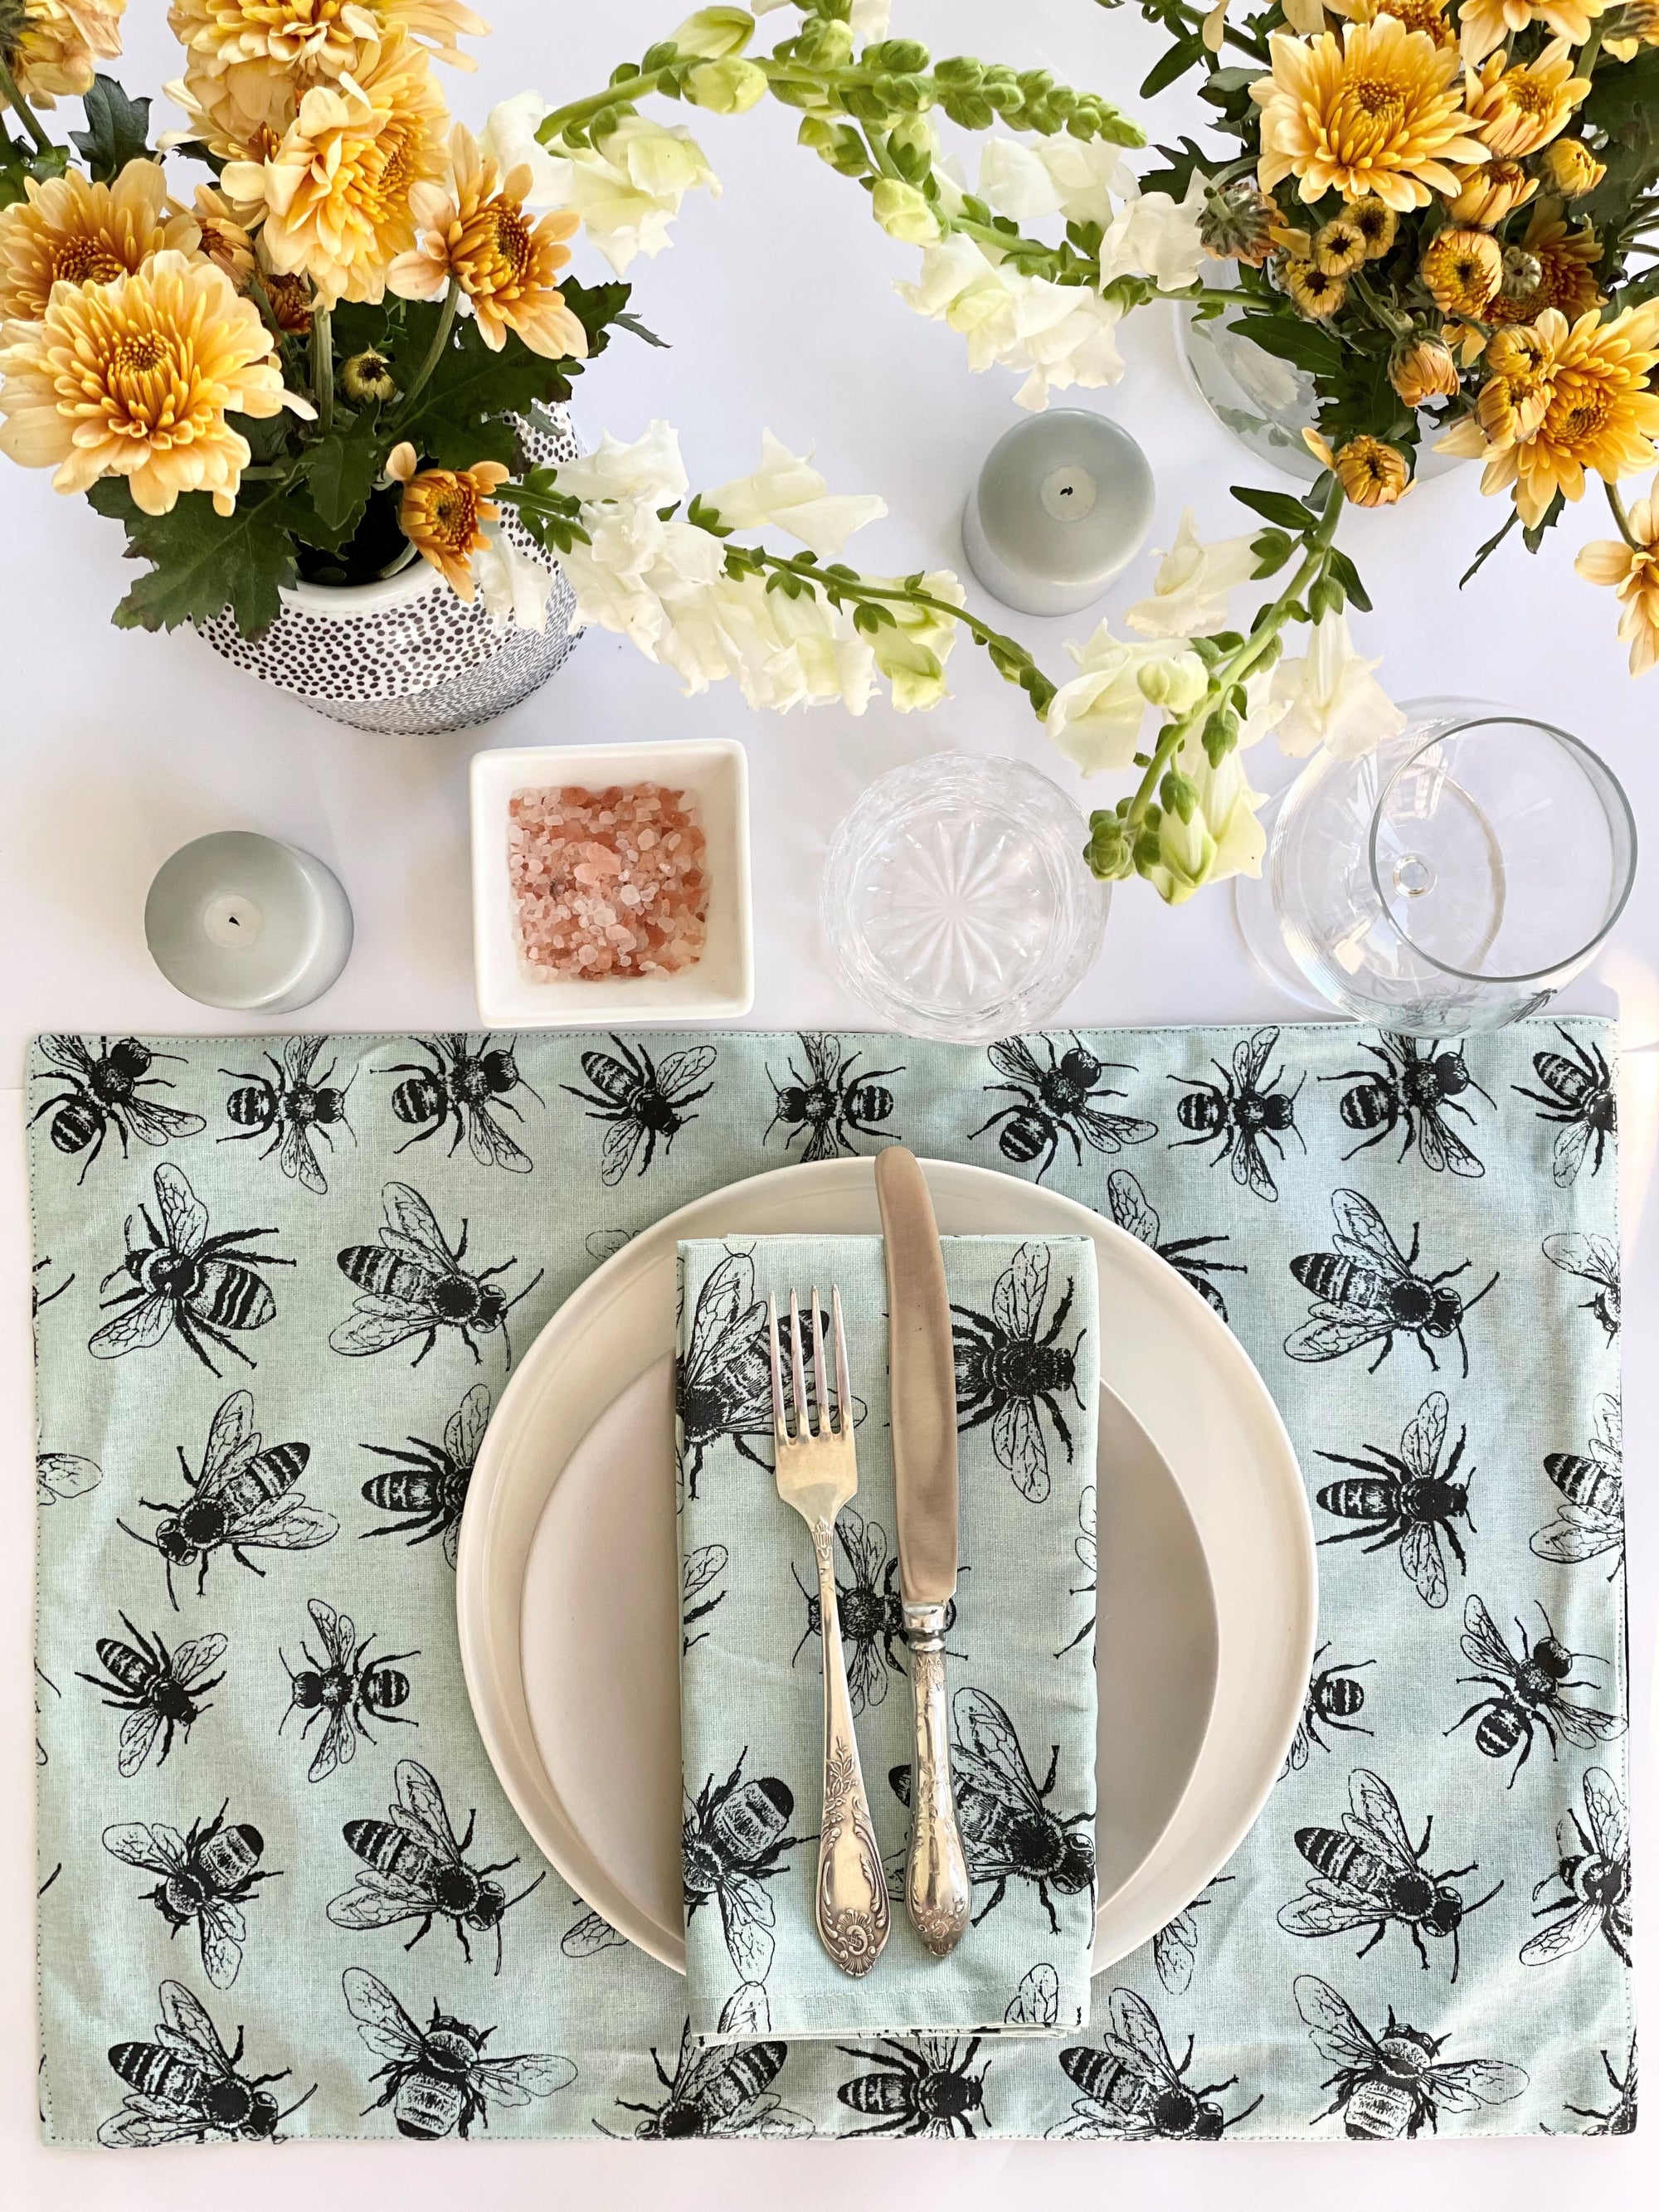 Placemats - Sketch Bees (Set of 4)